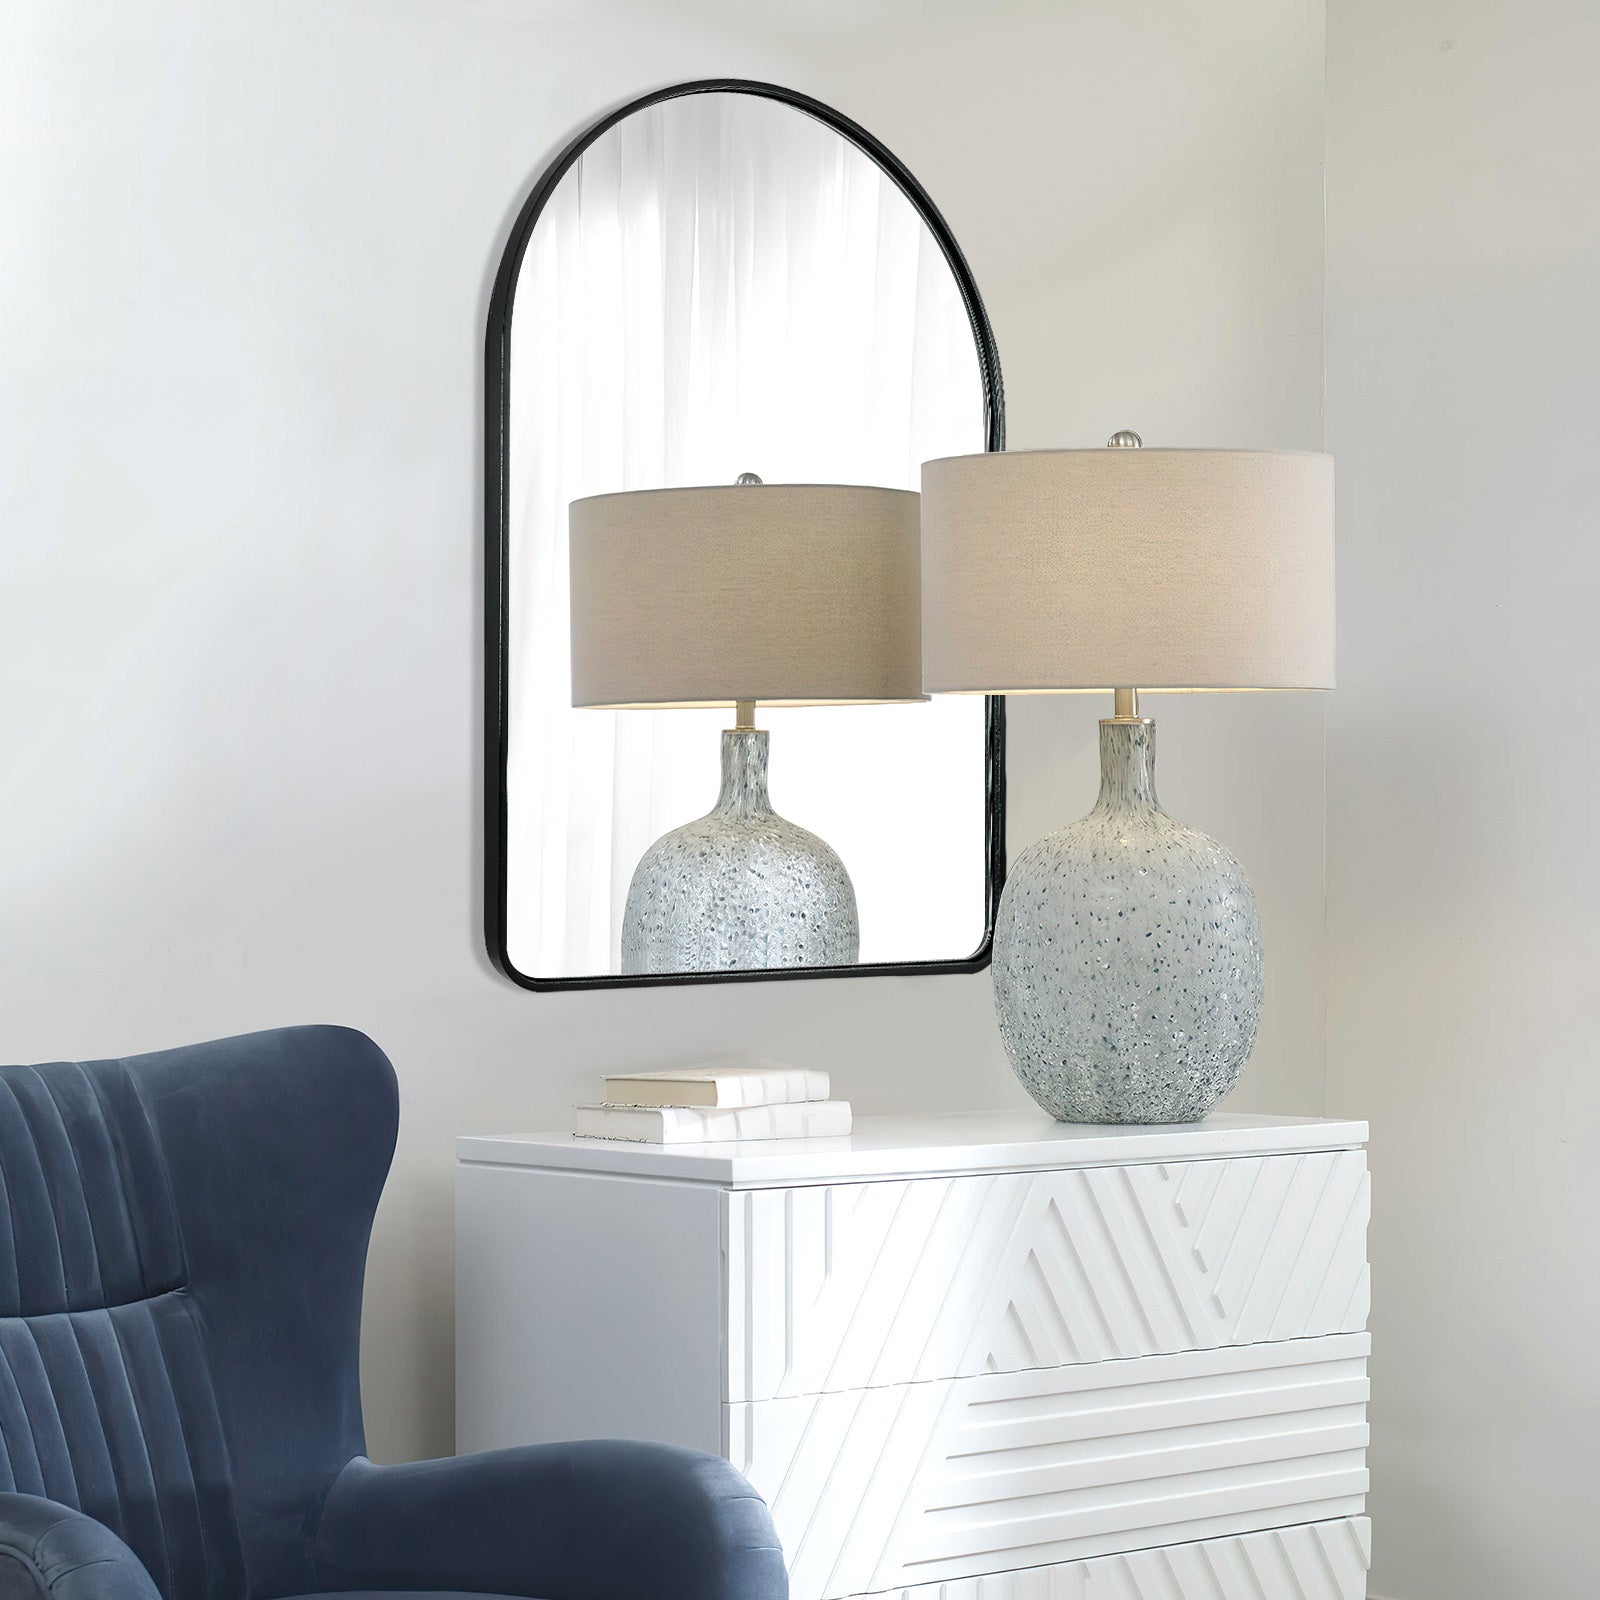 Antique Arched Bathroom Wall Mirror, Vanity Wall Mounted mirrors | Stainless Steel Frame